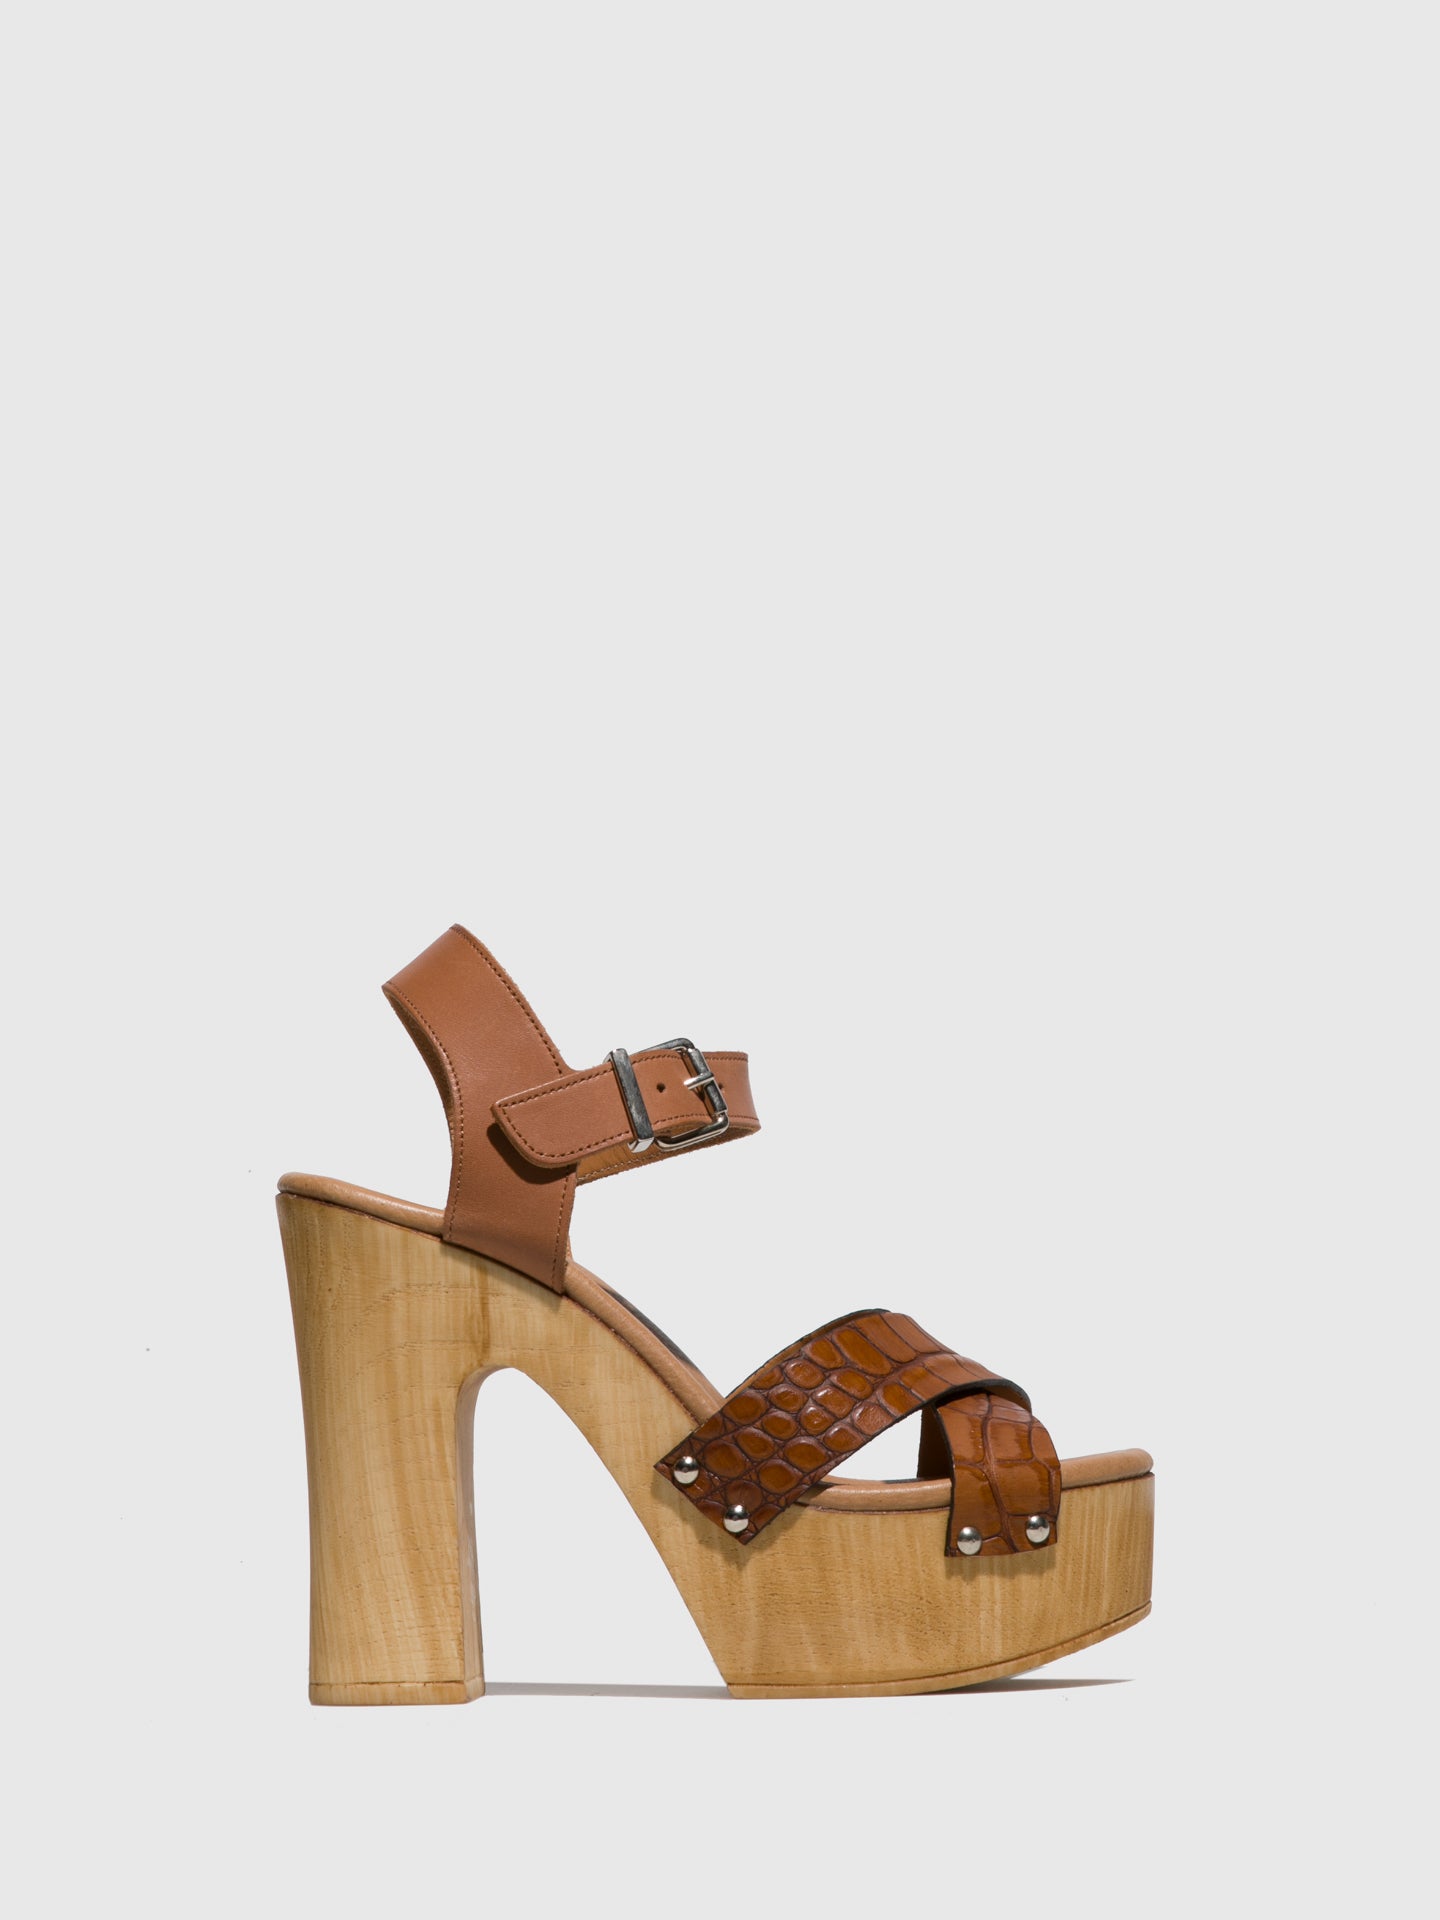 Clay's Sienna Sling-Back Pumps Sandals